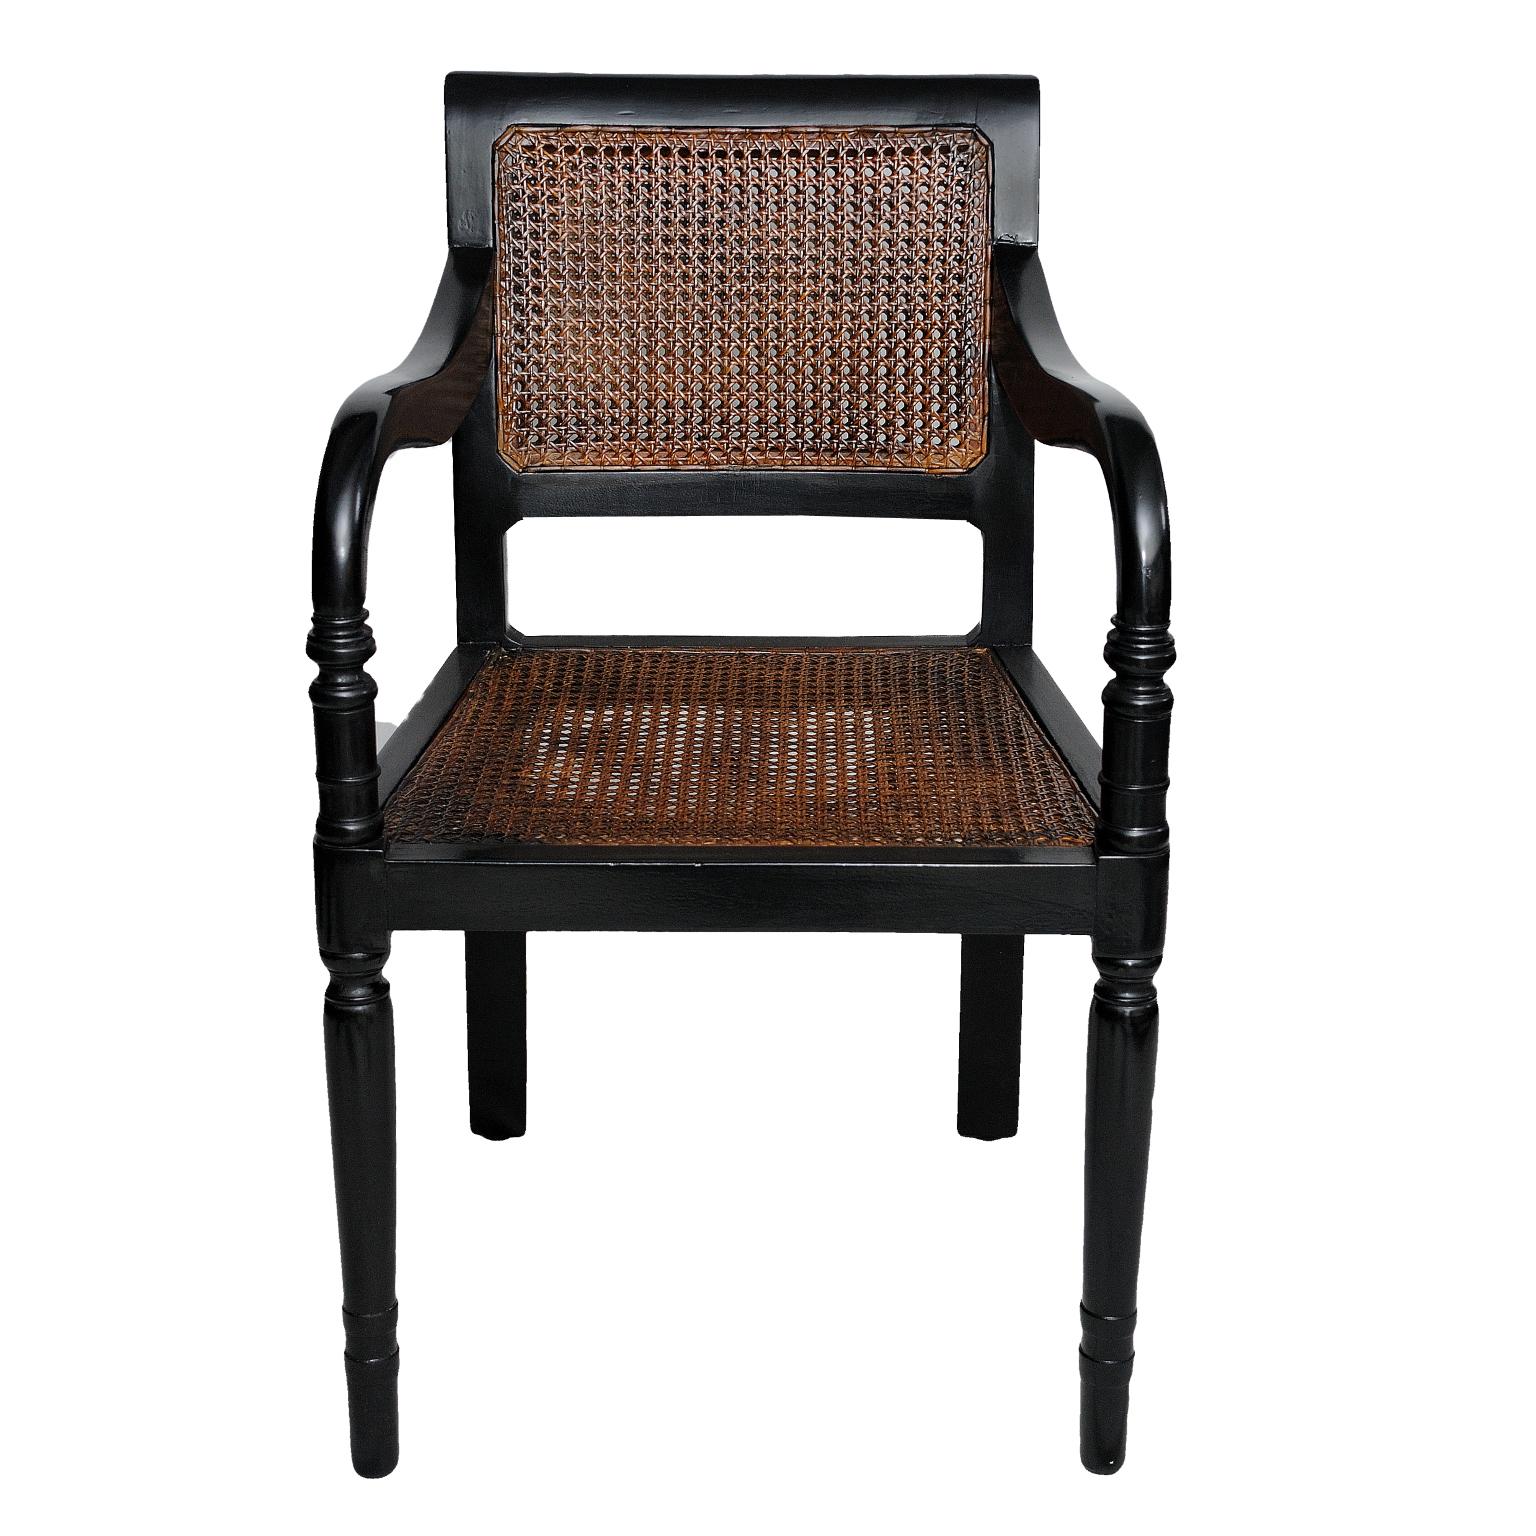 This is a lovely Anglo Indian ebonized desk/open armchair with cane work in beautiful mint condition, circa 1880.